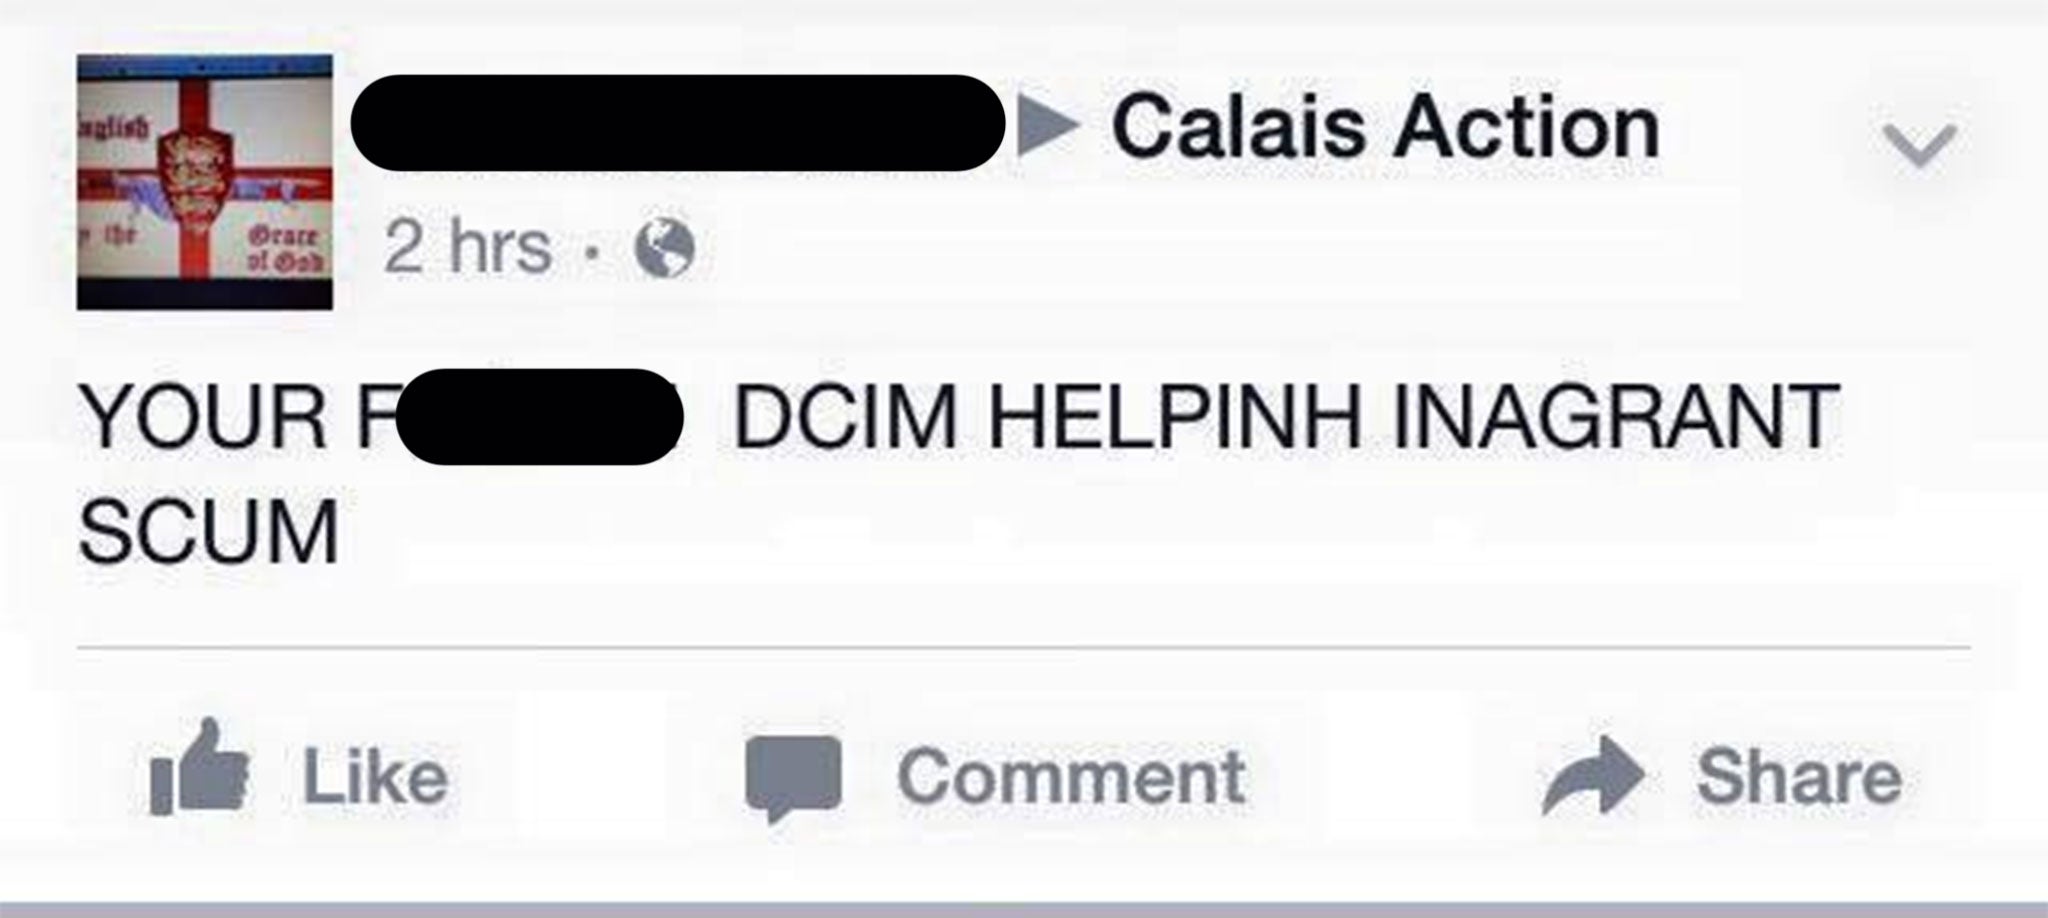 The abuse posted to Calais Action's Facebook page